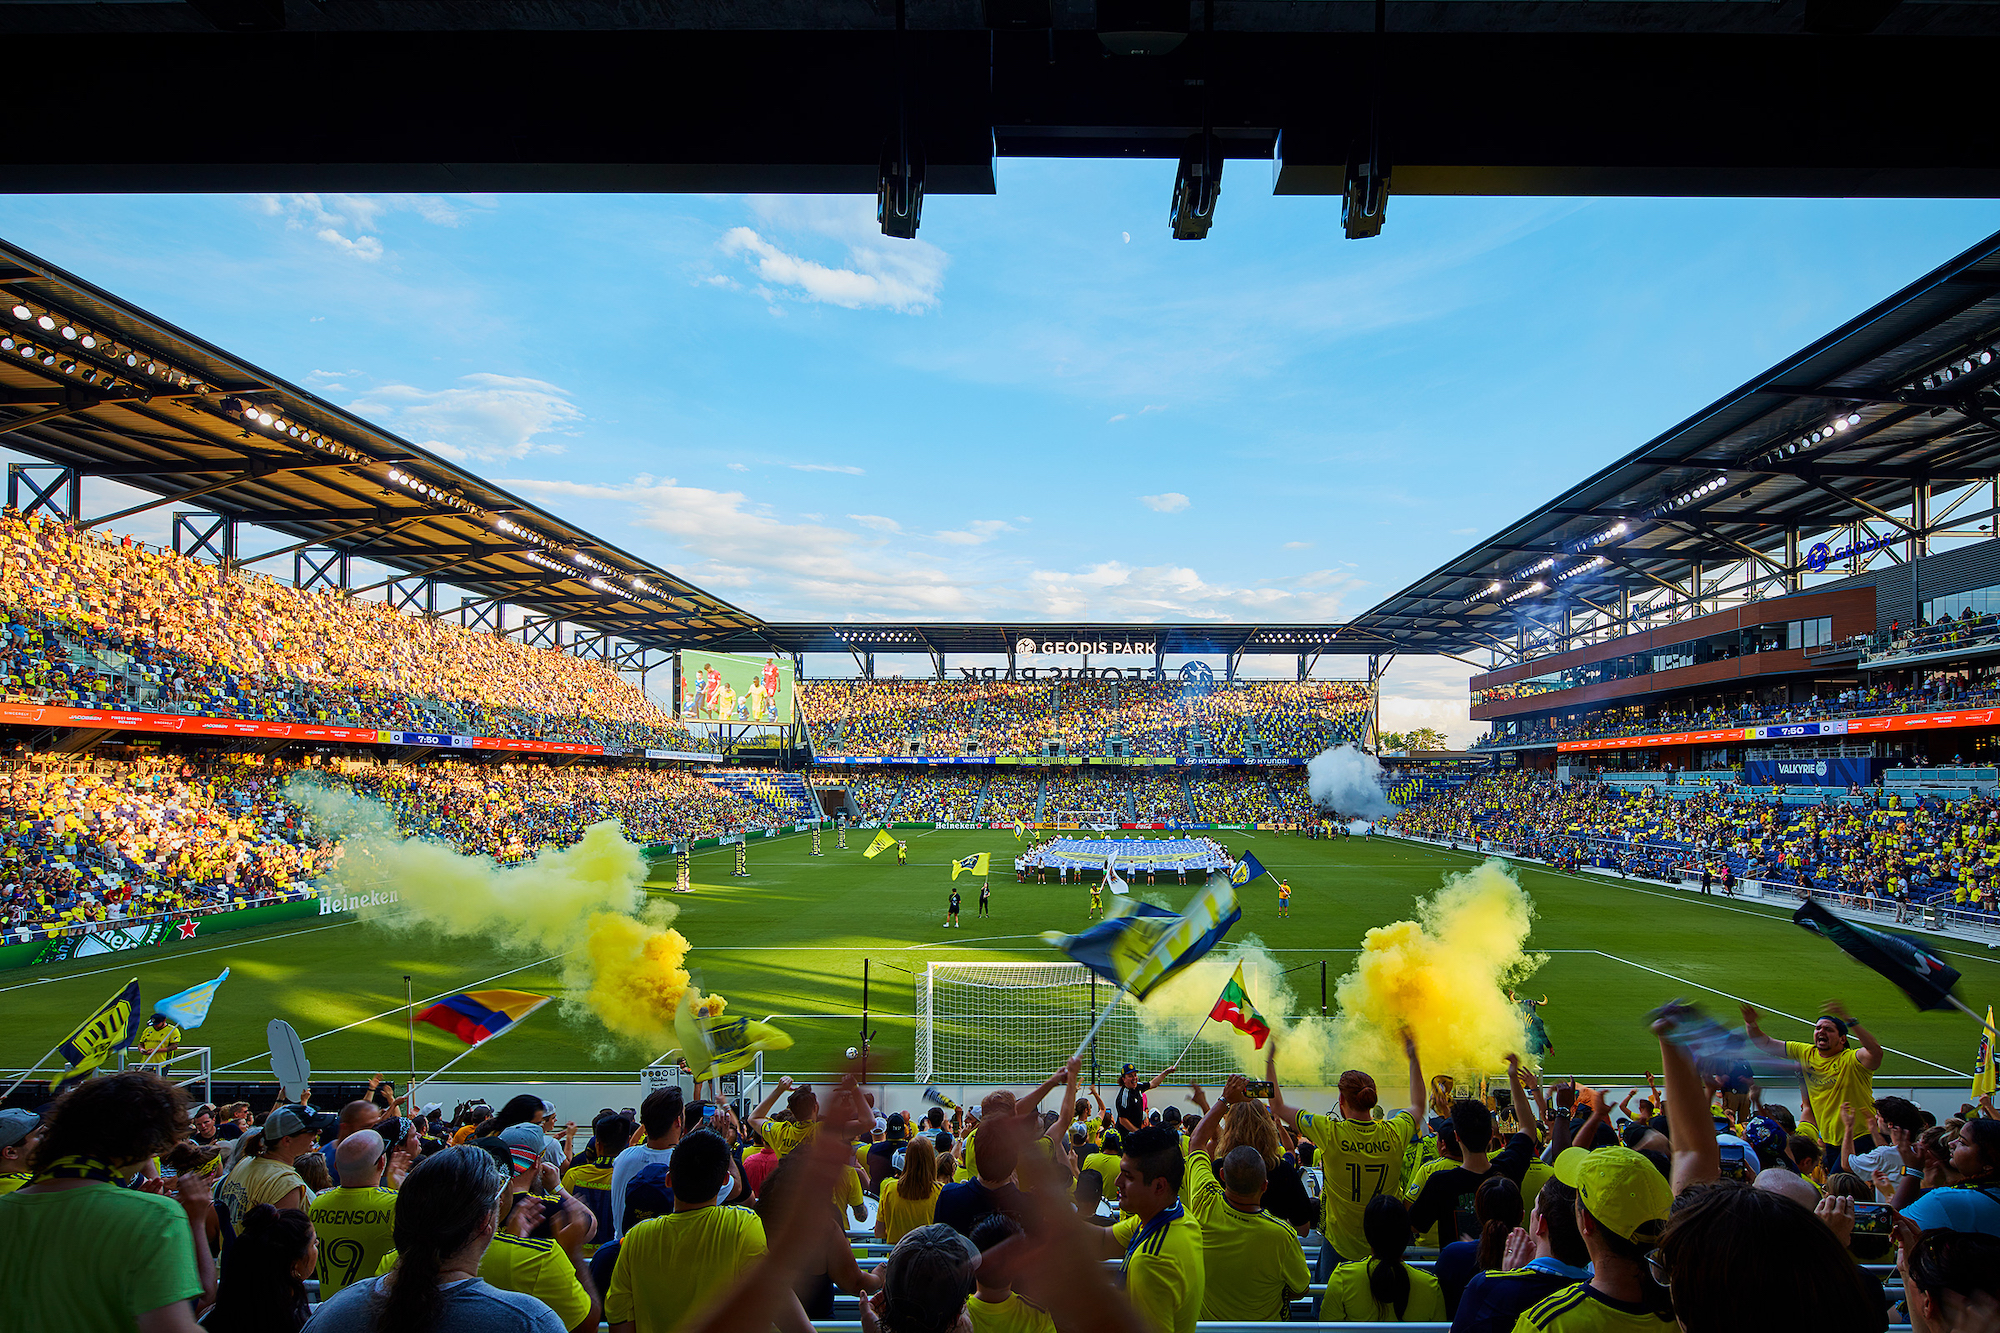 Nashville boasts the largest soccer-specific stadium in the U.S. and Canada - GEODIS Park Photo: Tom Harris